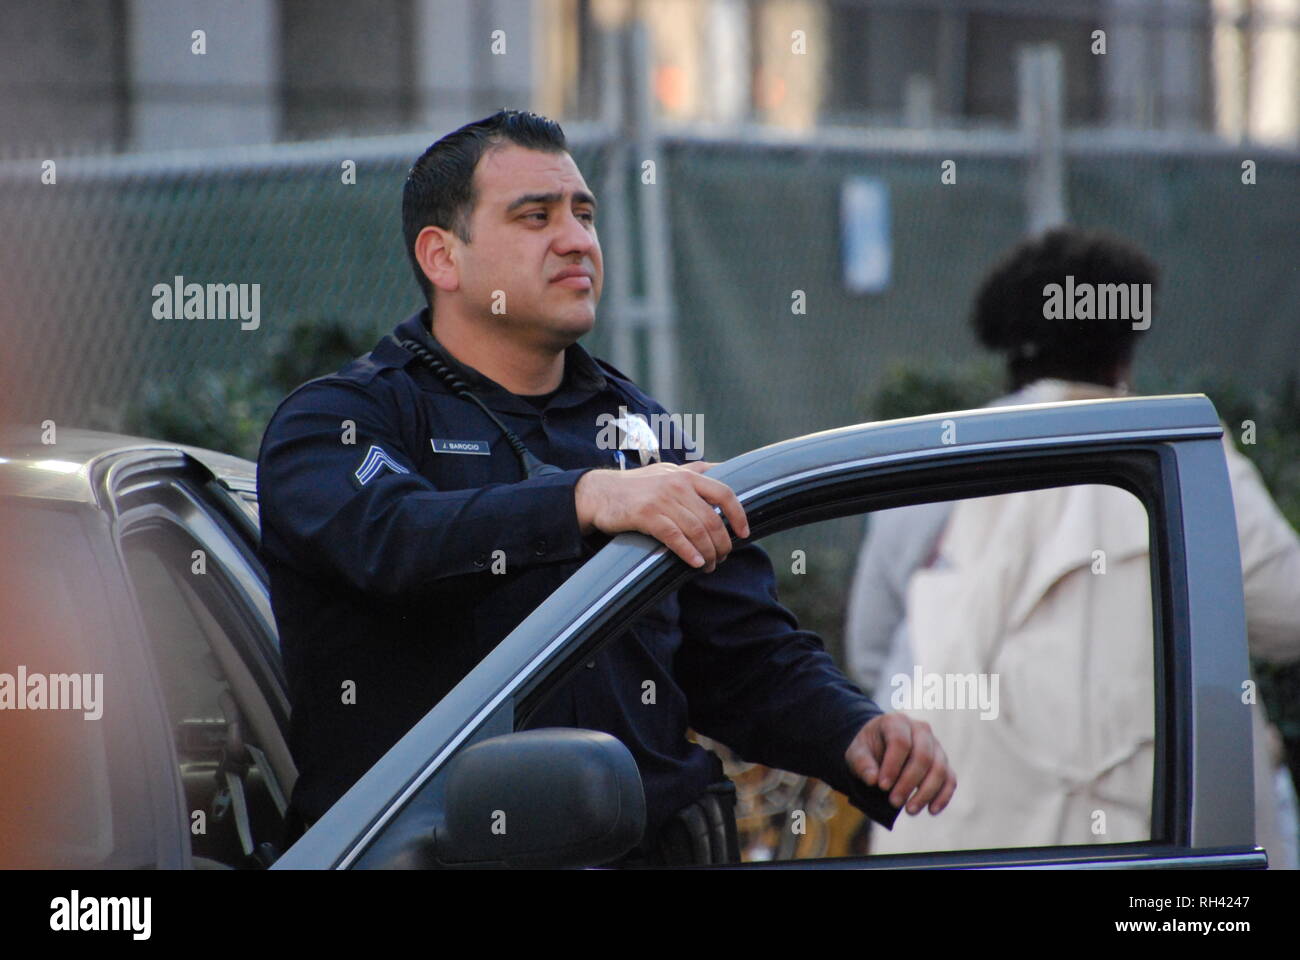 Oakland police Officer Jose Barocio providing security outside a Kamala Harris for President rally in downtown Oakland on Jan. 27, 2019. Stock Photo